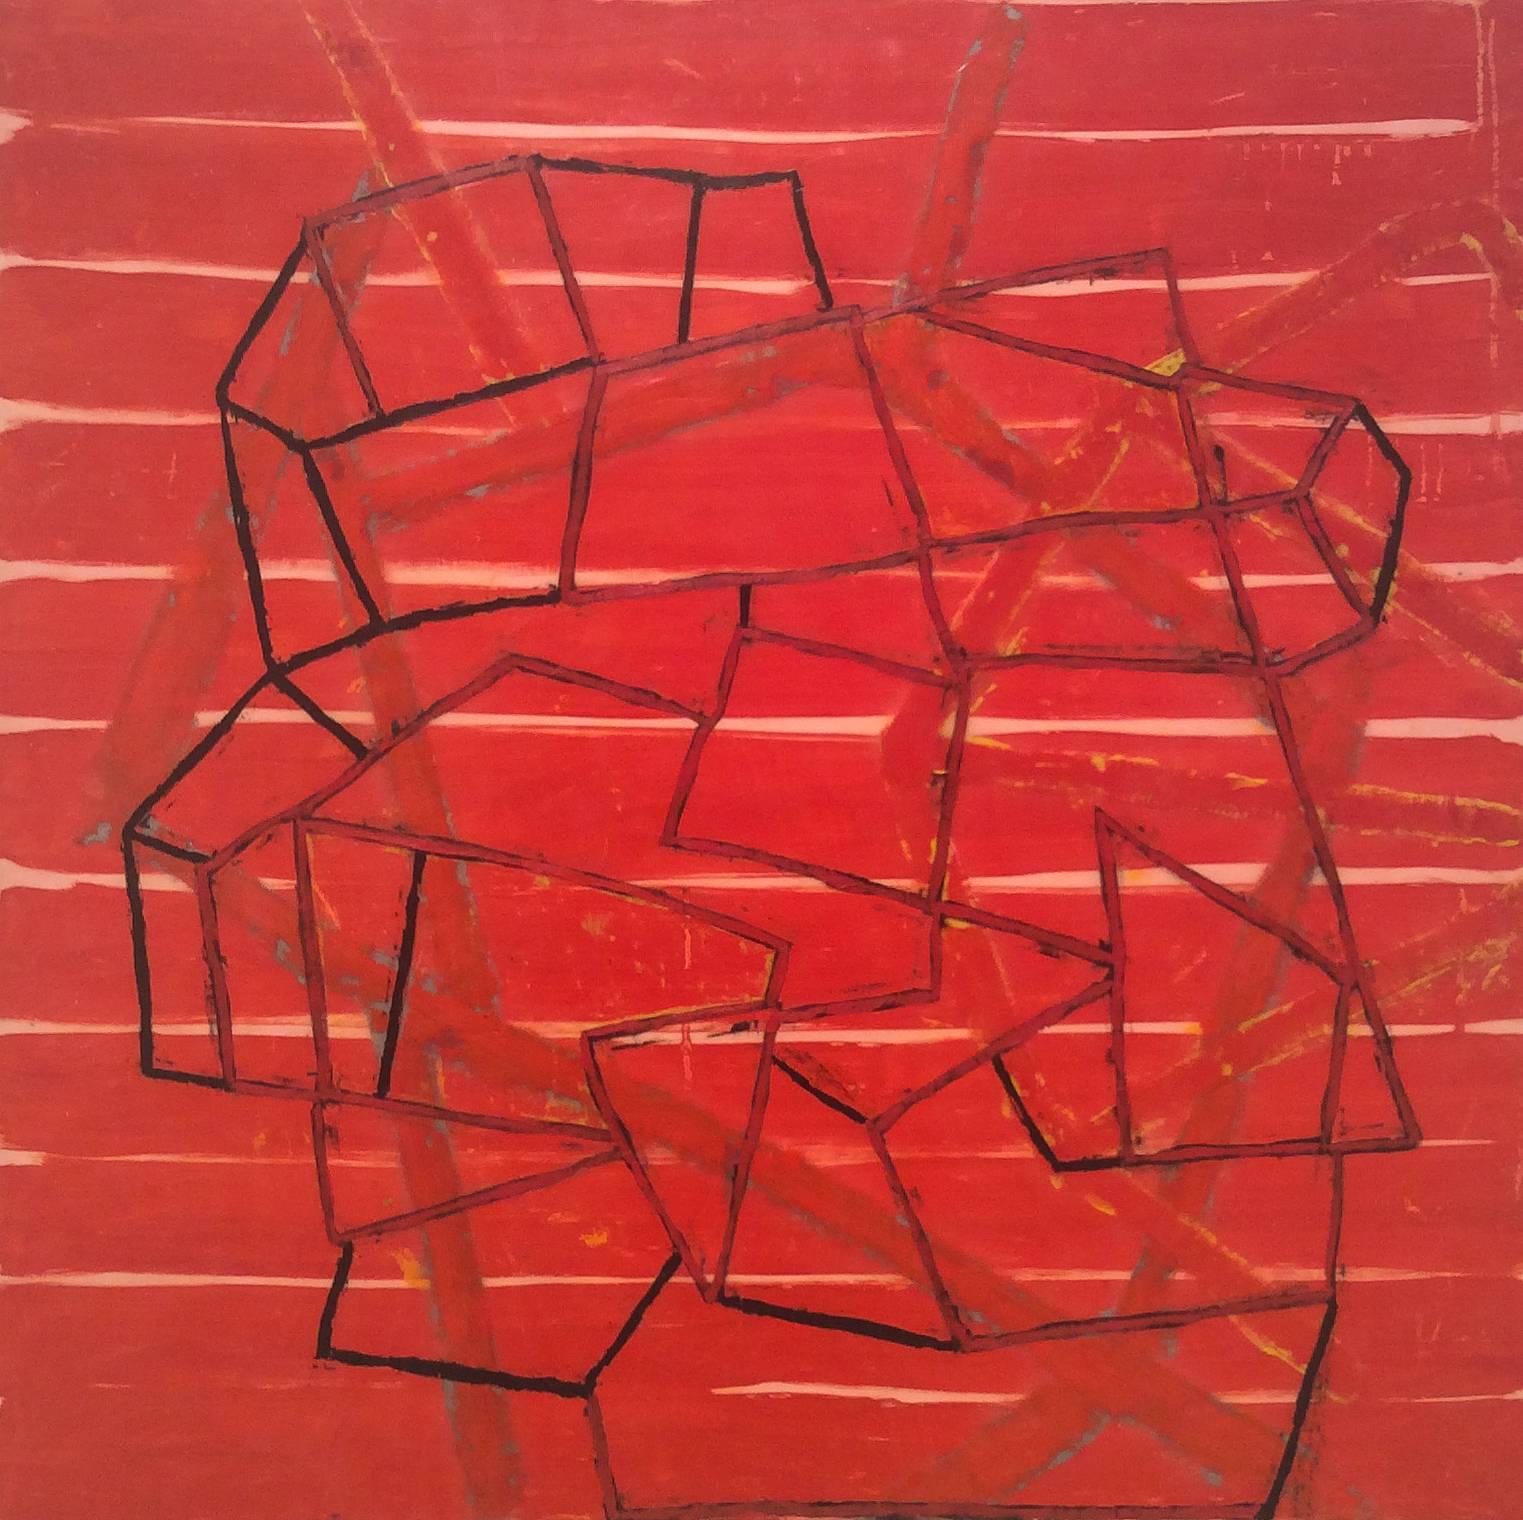 Hobgood (Abstract Red Encaustic Painting on Board with Black Geometric Patterns)